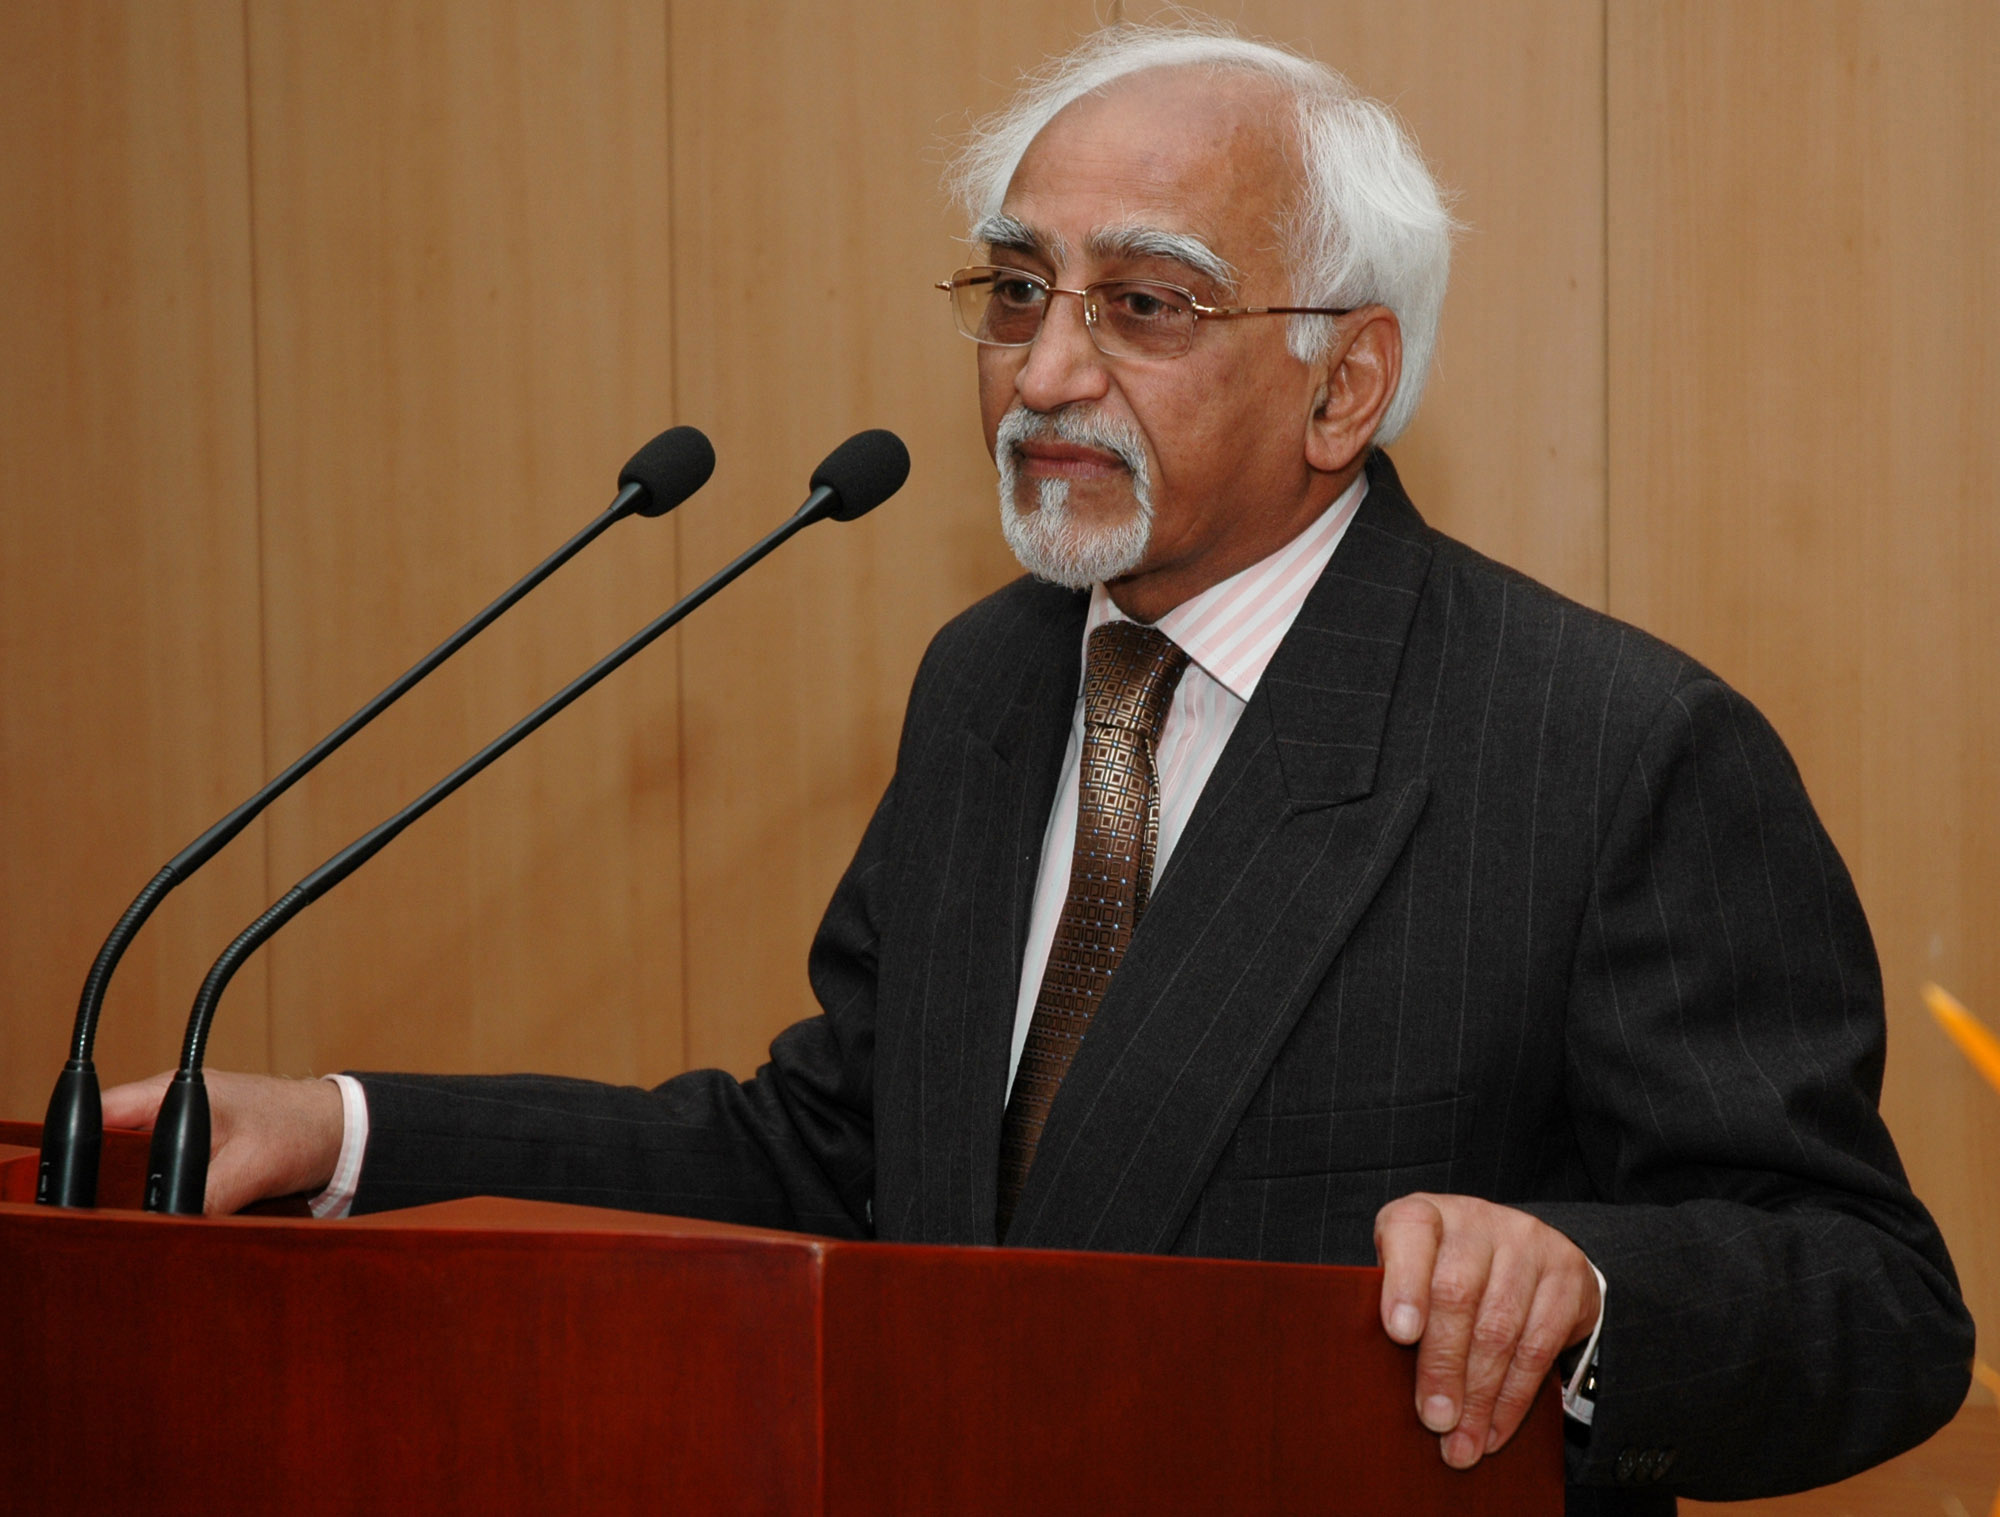 Time machine inventors trying to go back to rewrite history: Ansari